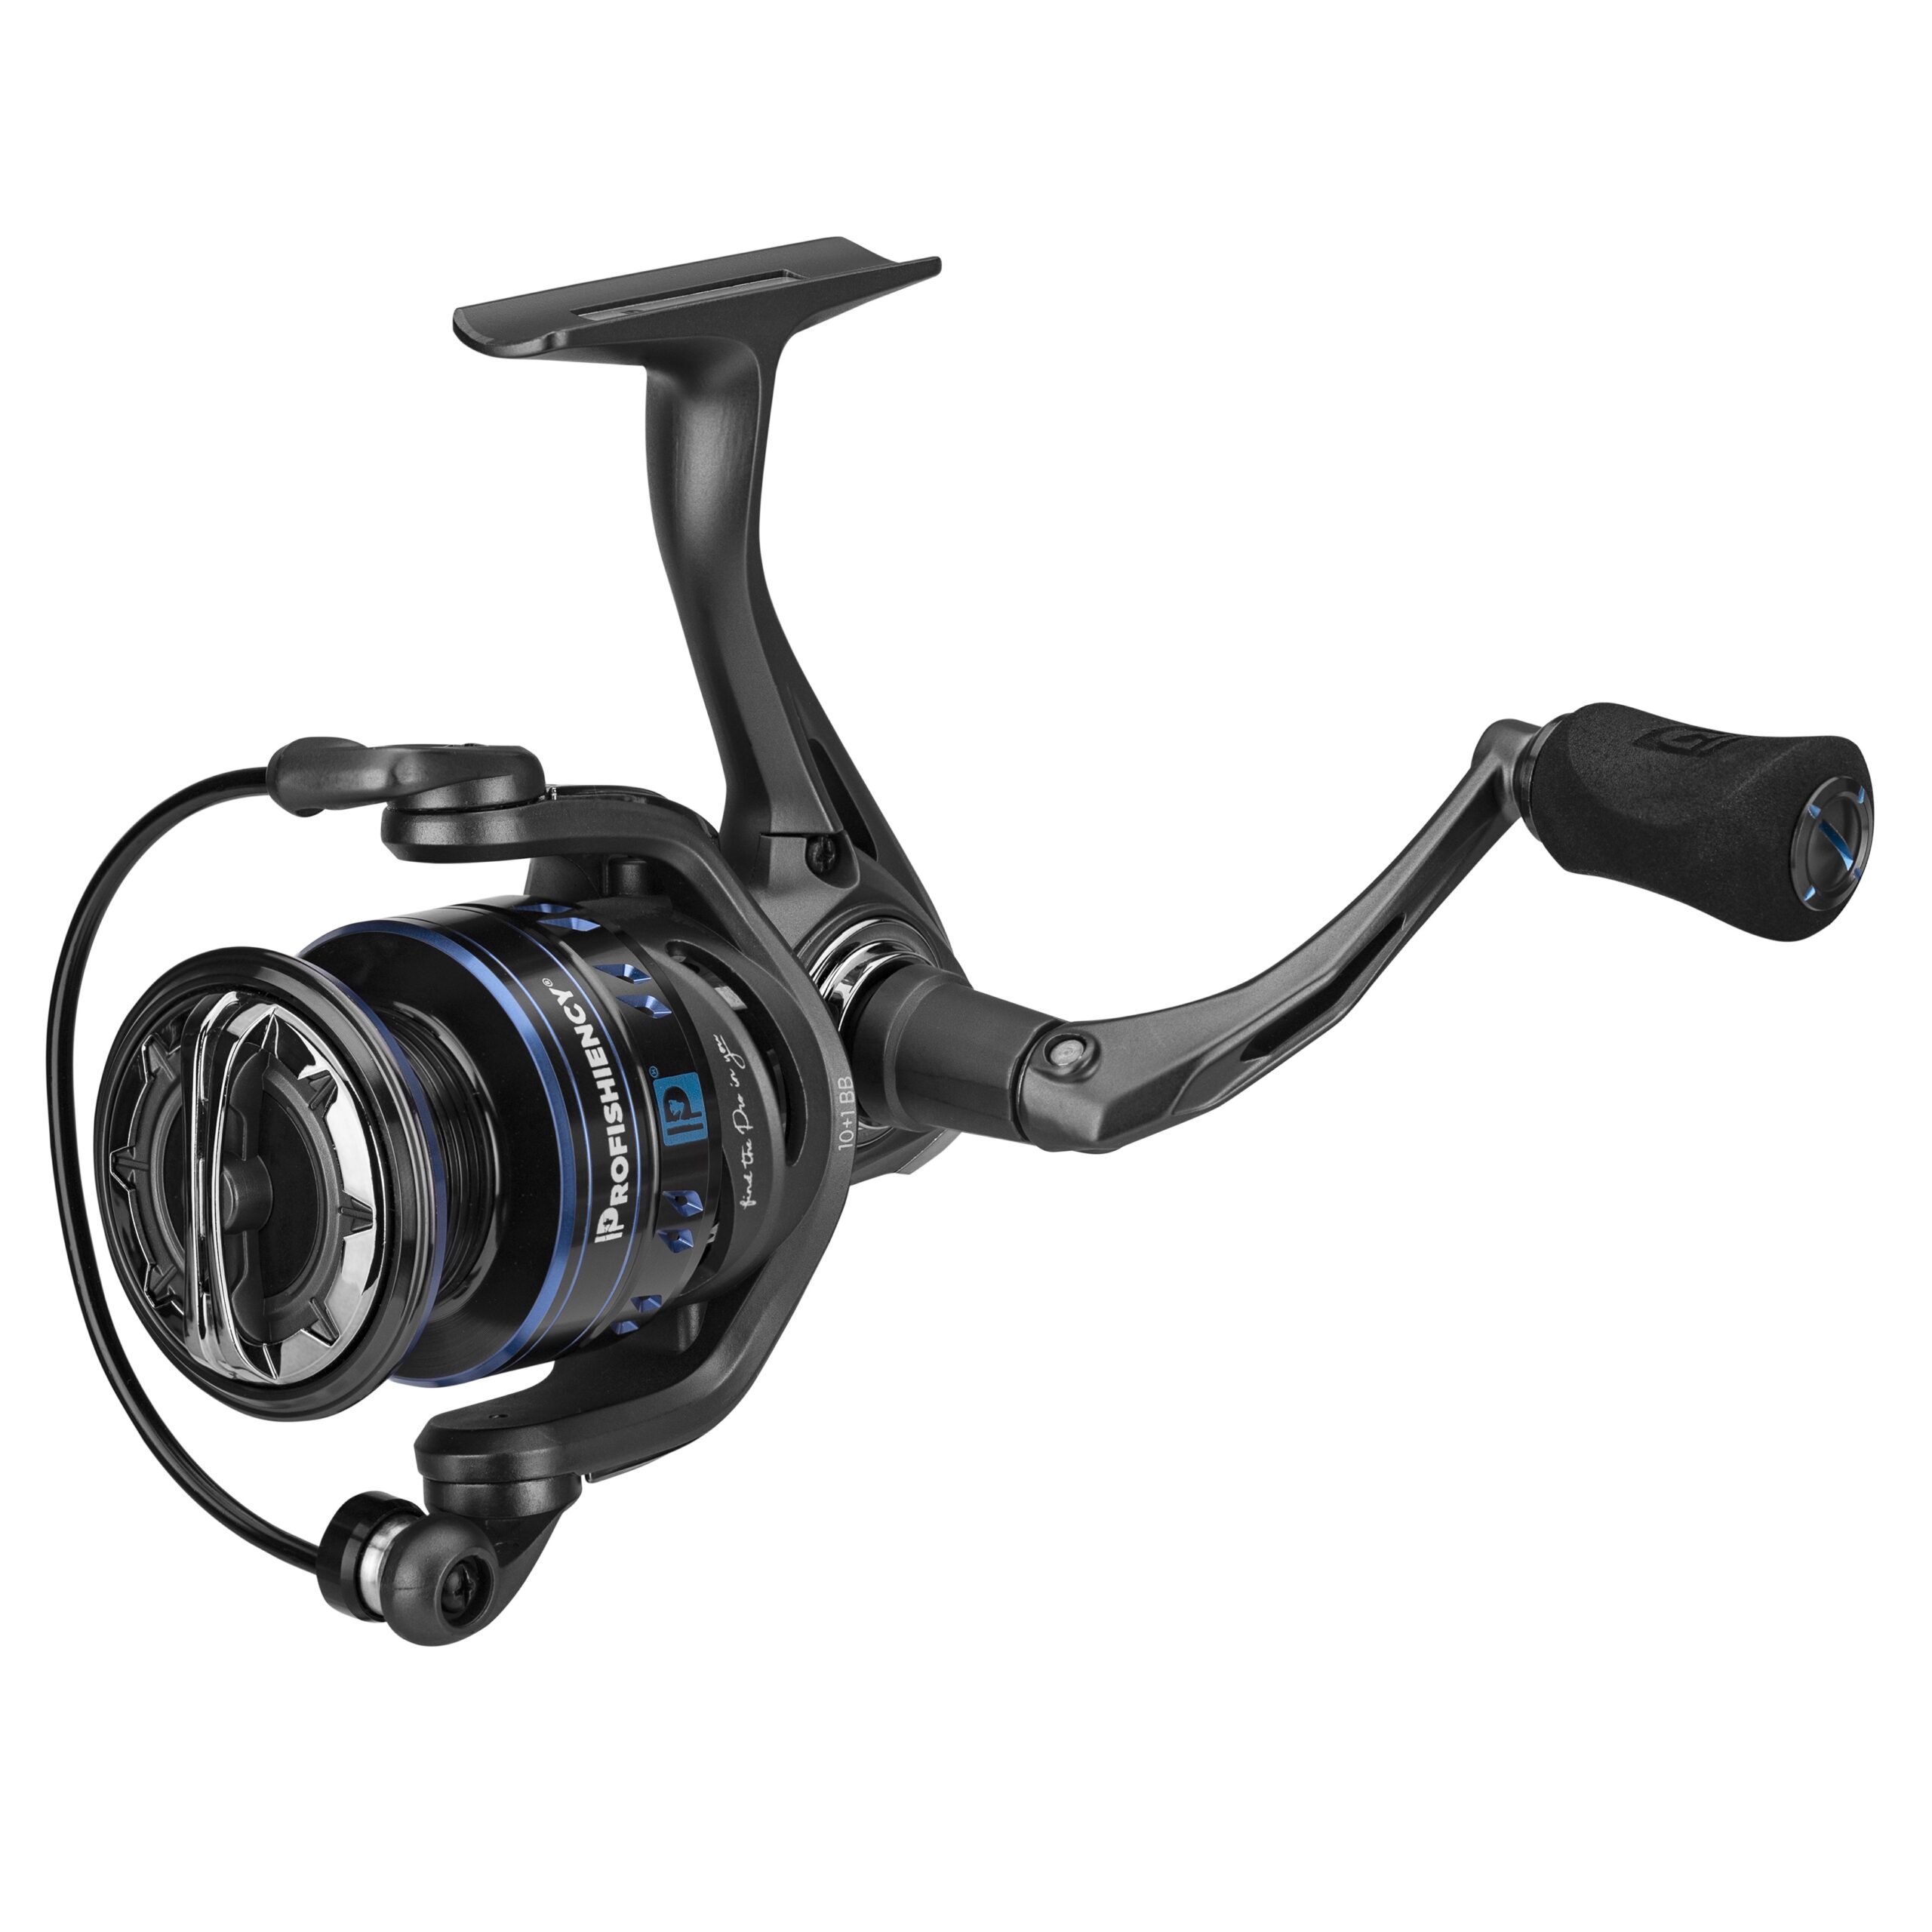 https://op2.0ps.us/original/opplanet-profishiency-a13-charcoal-blue-spinning-reel-3000-multicolor-a13-3kcb-main